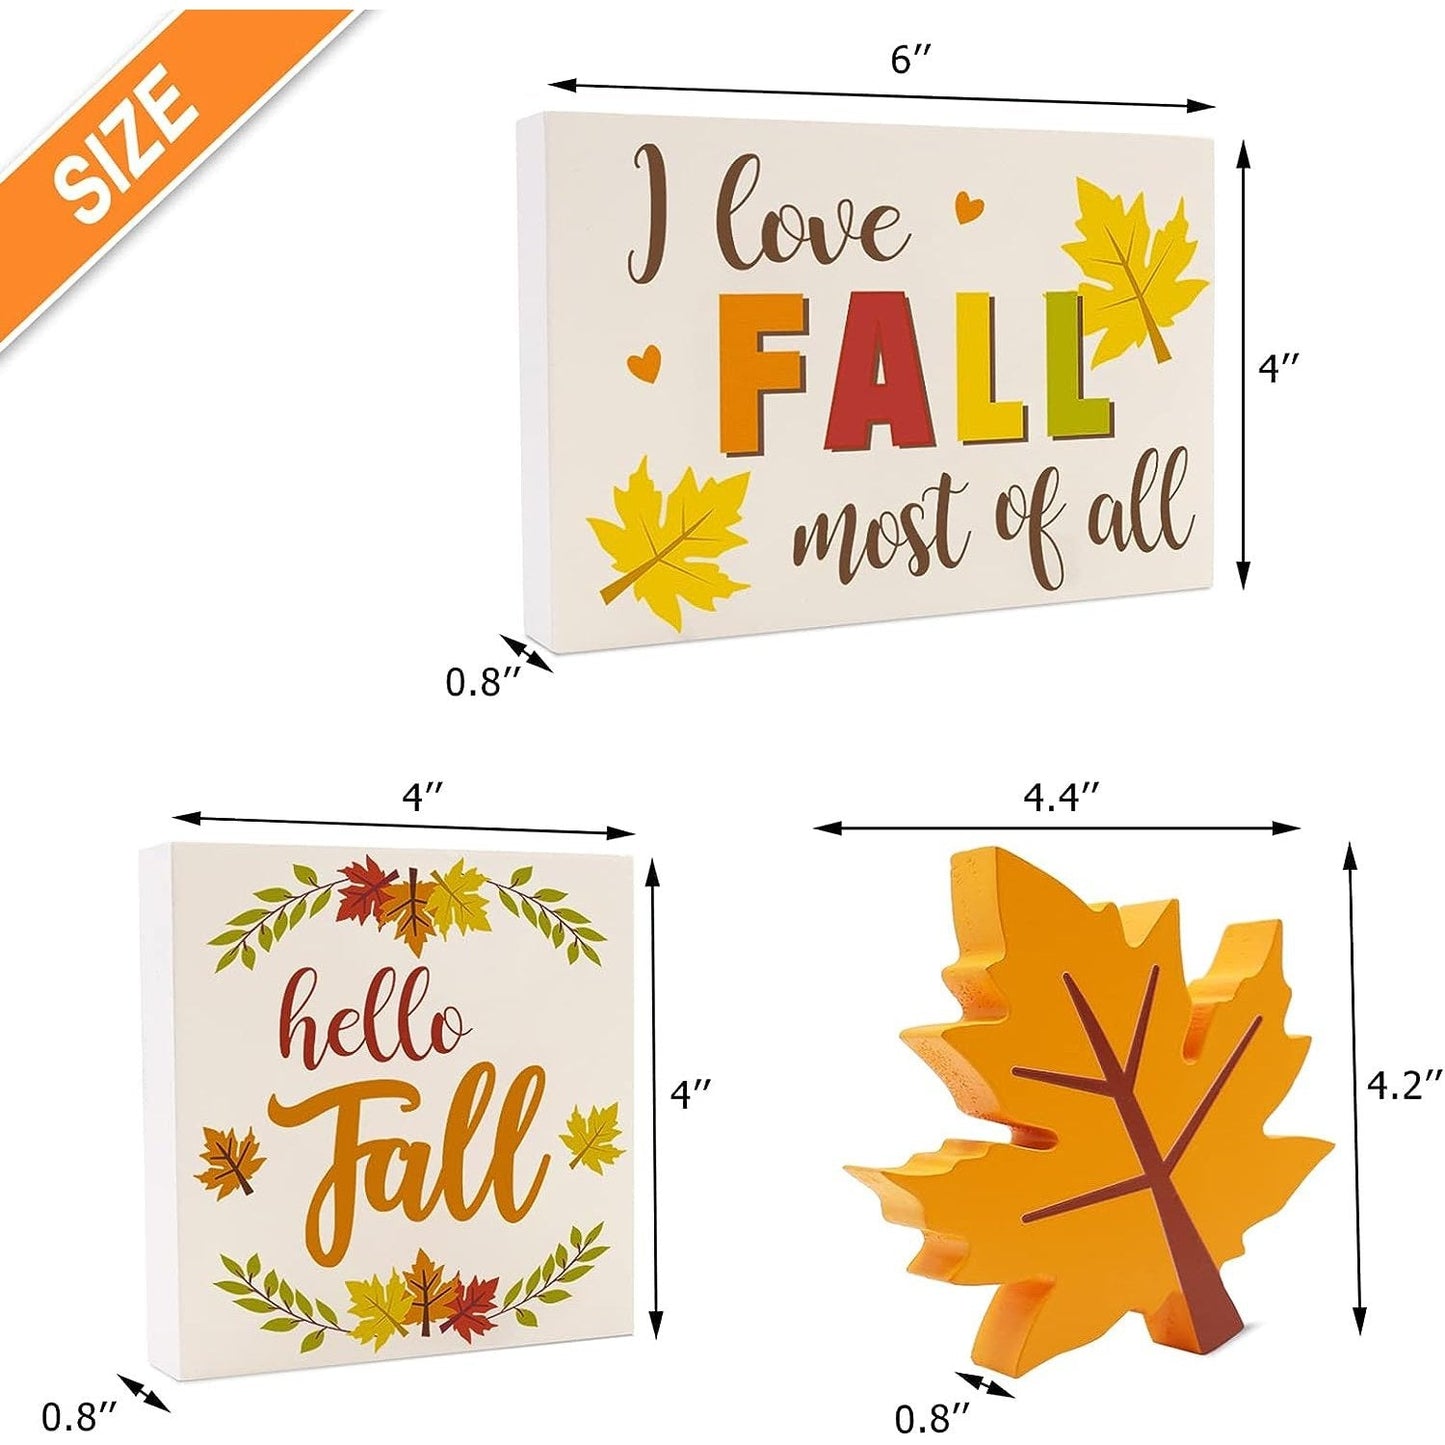 Fall Maple Leaf Tiered Tray Decor Wood Signs Self Standing Wooden Block momhomedecor